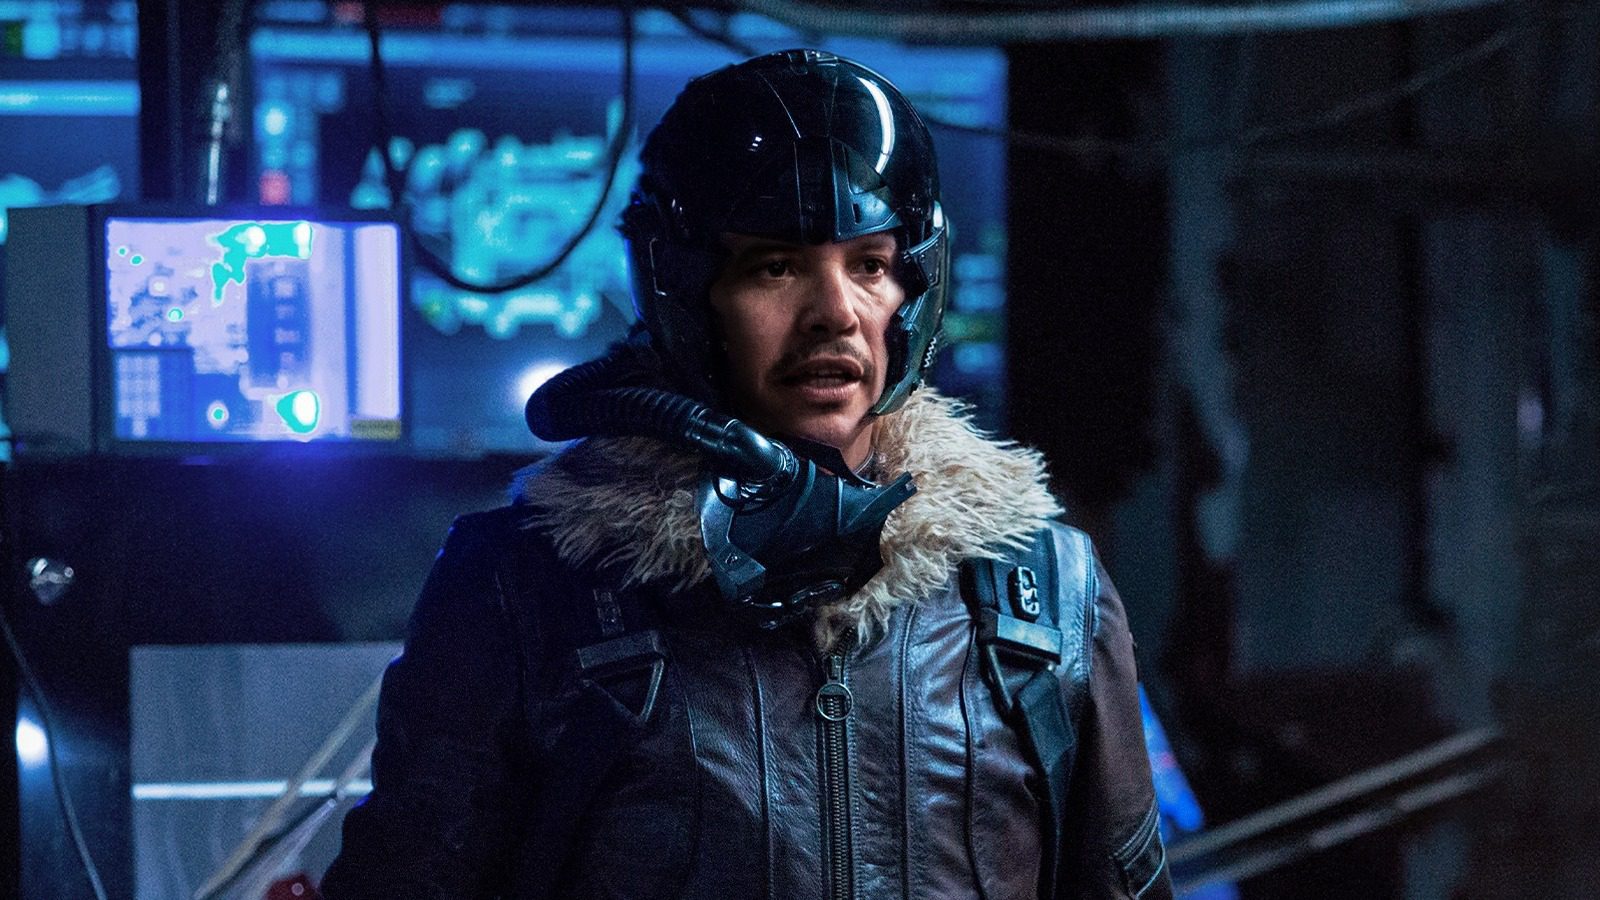 John Leguizamo Was Going To Be The MCU's Vulture After Michael Keaton First Backed Out